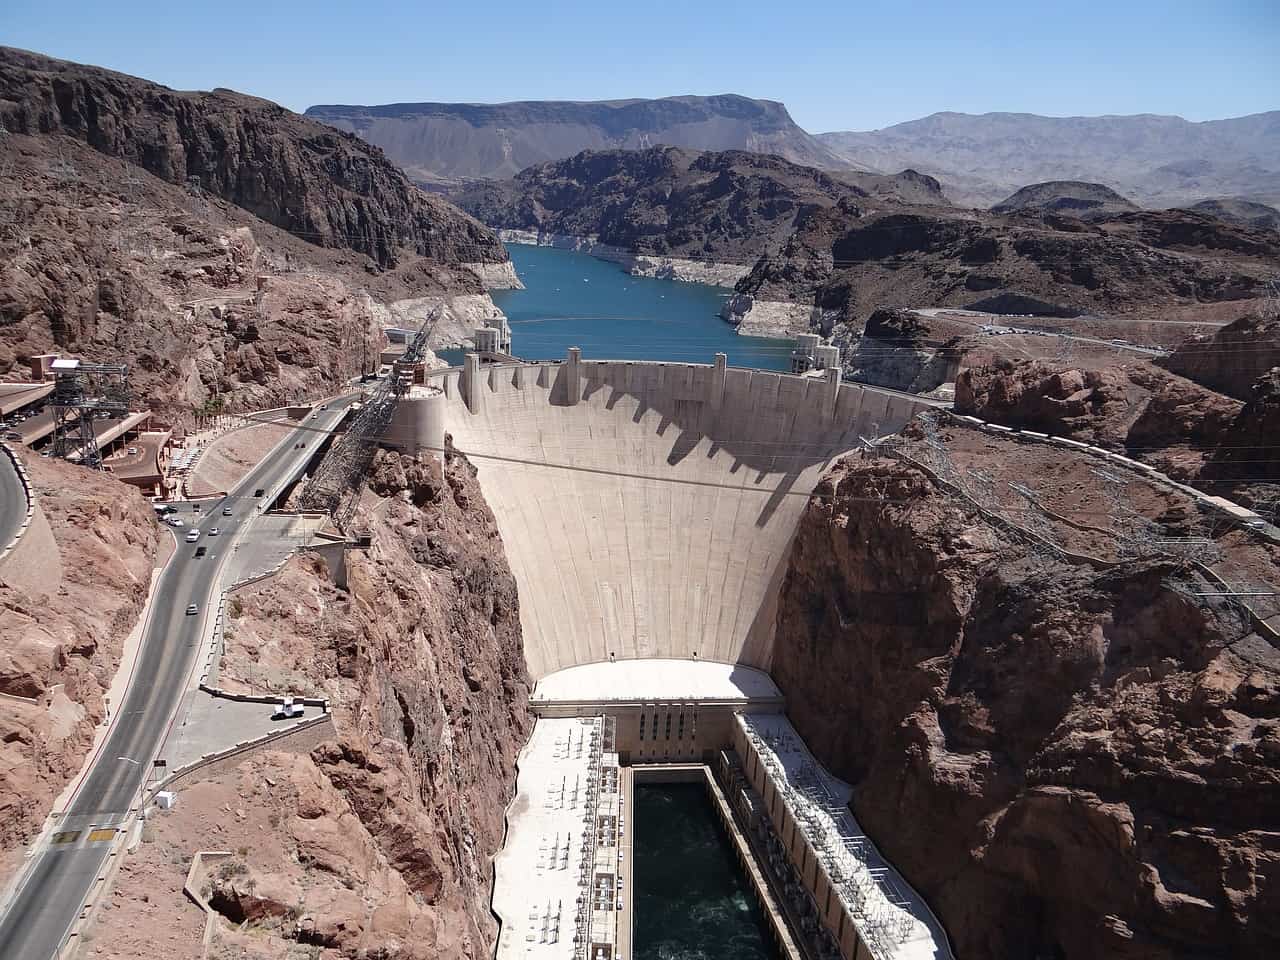 See the Hoover Dam during your 5 day Arizona vacation